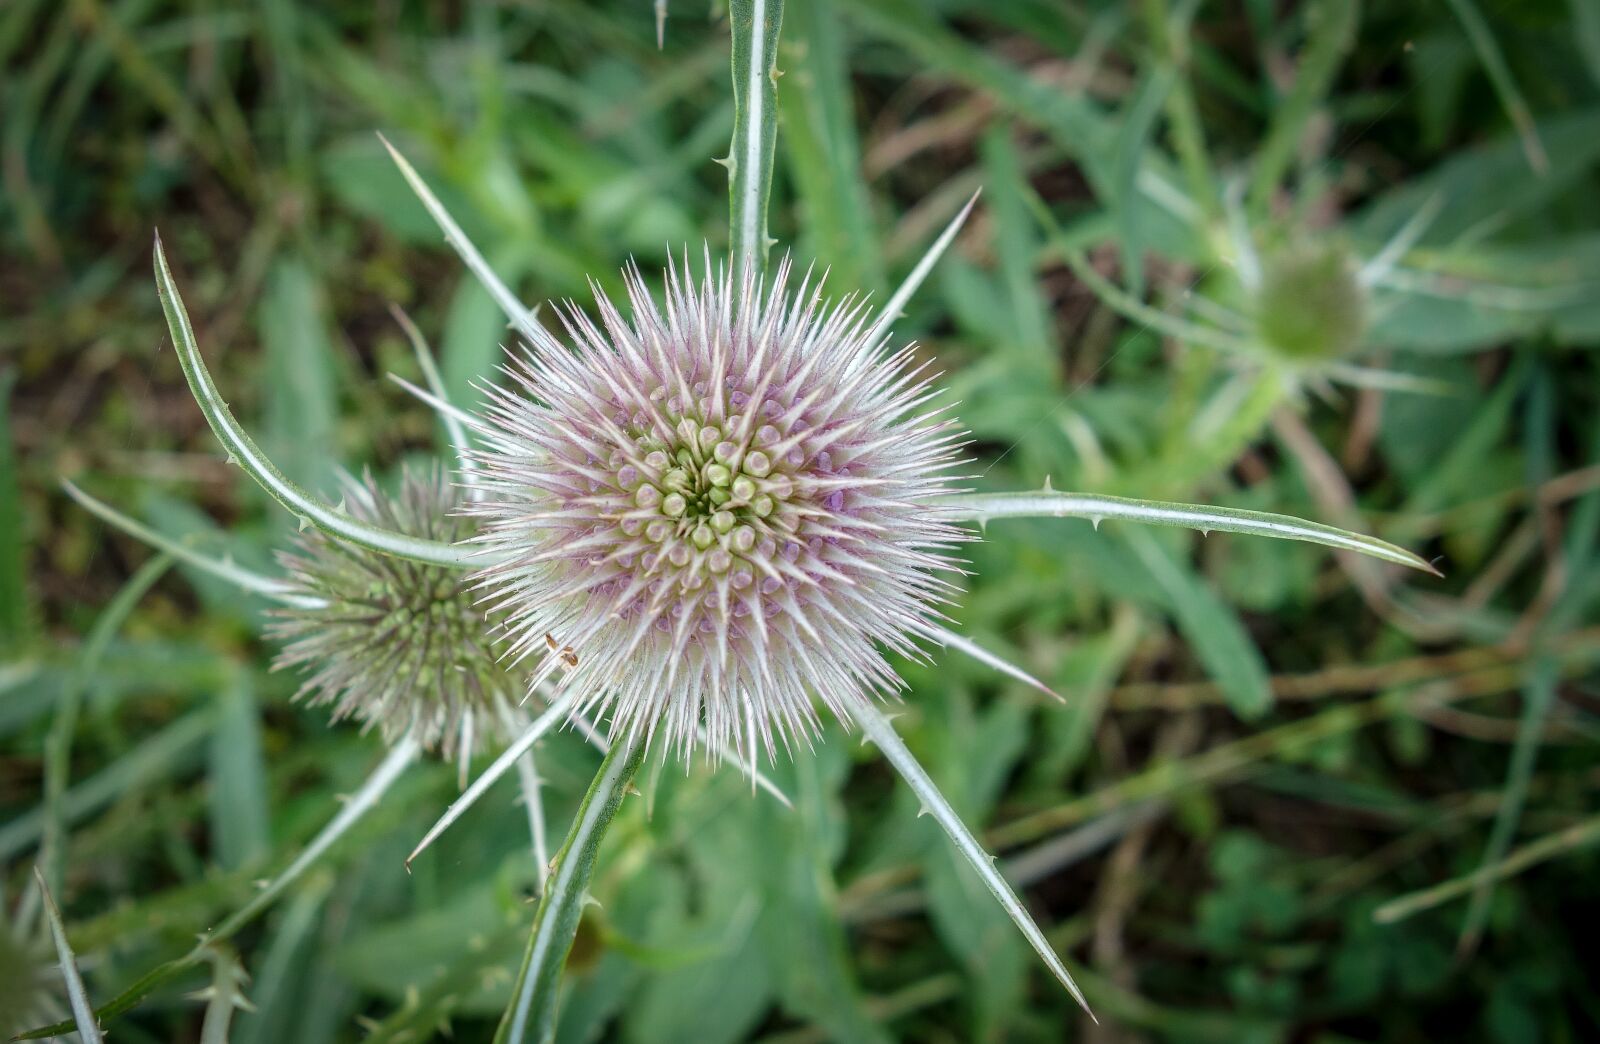 Sony Cyber-shot DSC-RX100 sample photo. Thistle, meadow, macro photography